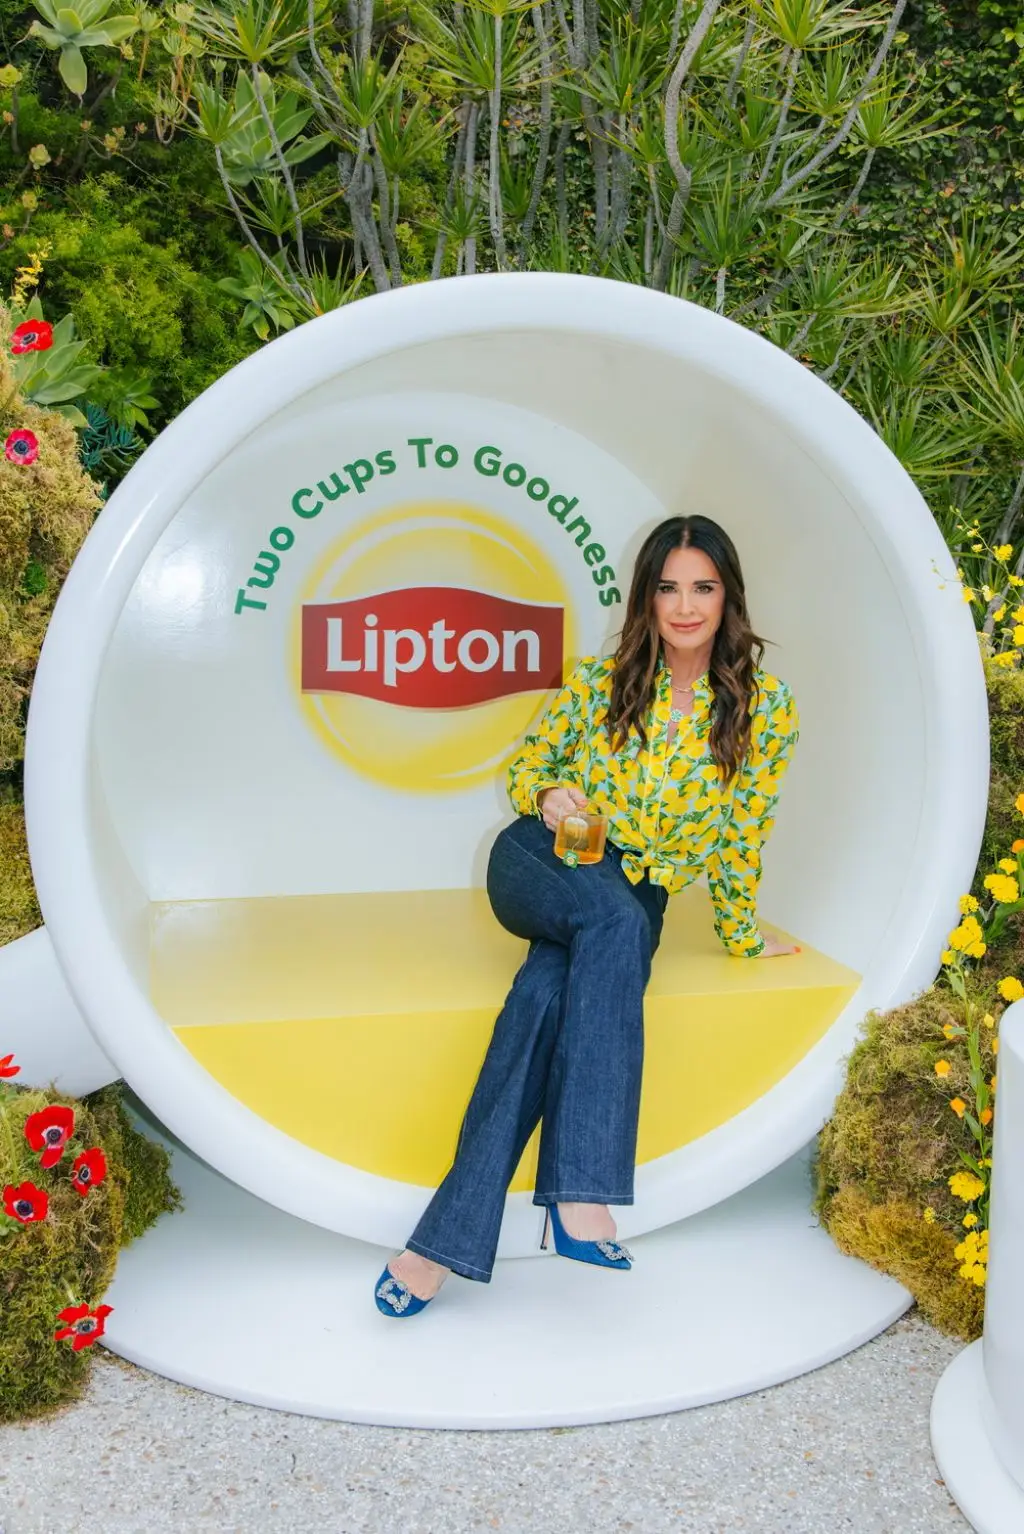 KYLE RICHARDS AT A HIGH TEA LUNCHEON WITH LIPTON GREEN TEA AT THE MAYBOURNE BEVERLY HILLS4